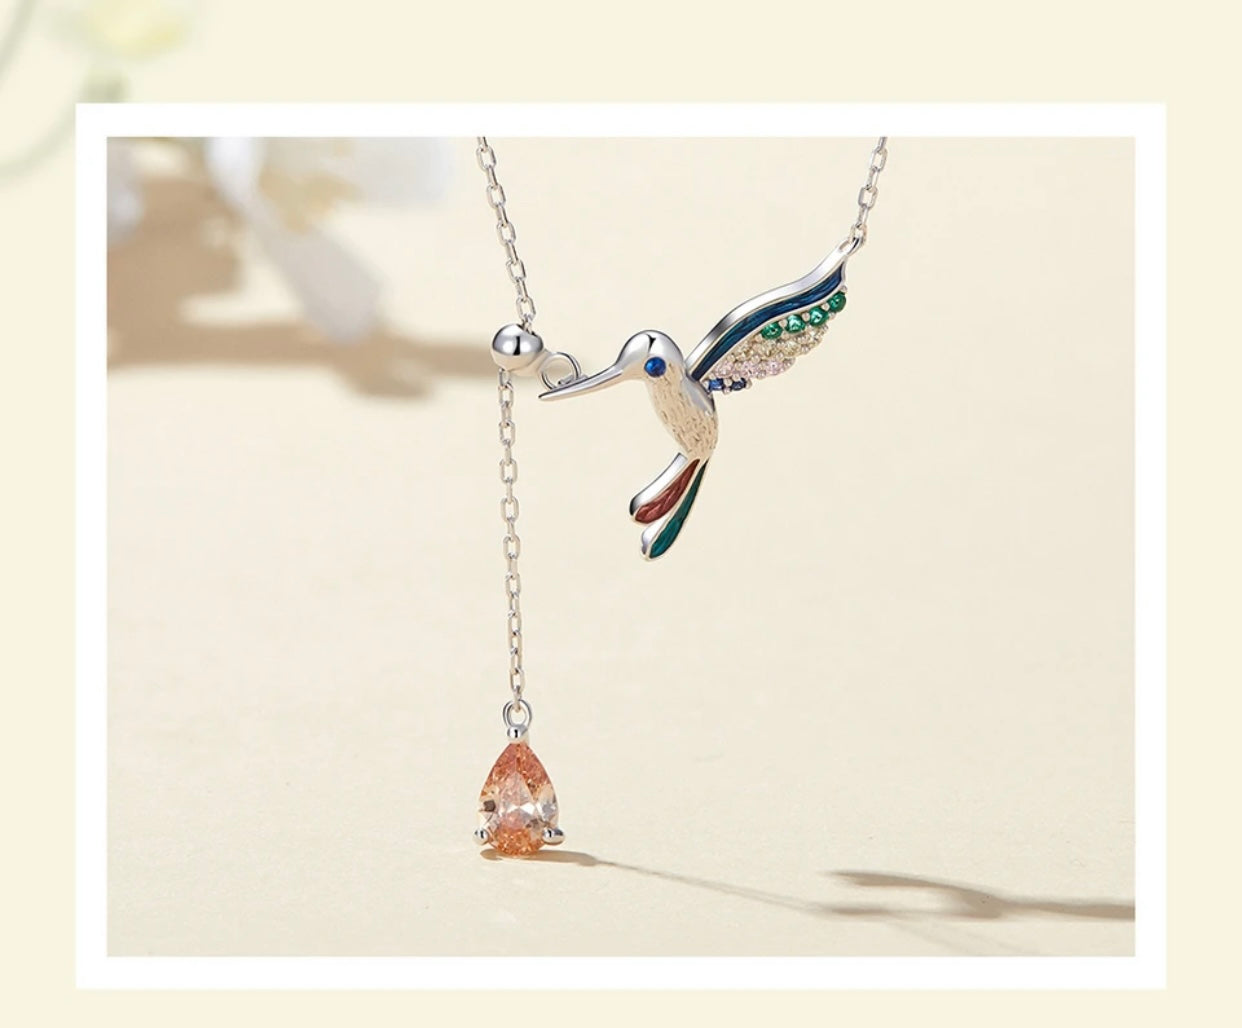 ANTILLEAN STERLING SILVER HUMMINGBIRD PENDENT NECKLACE